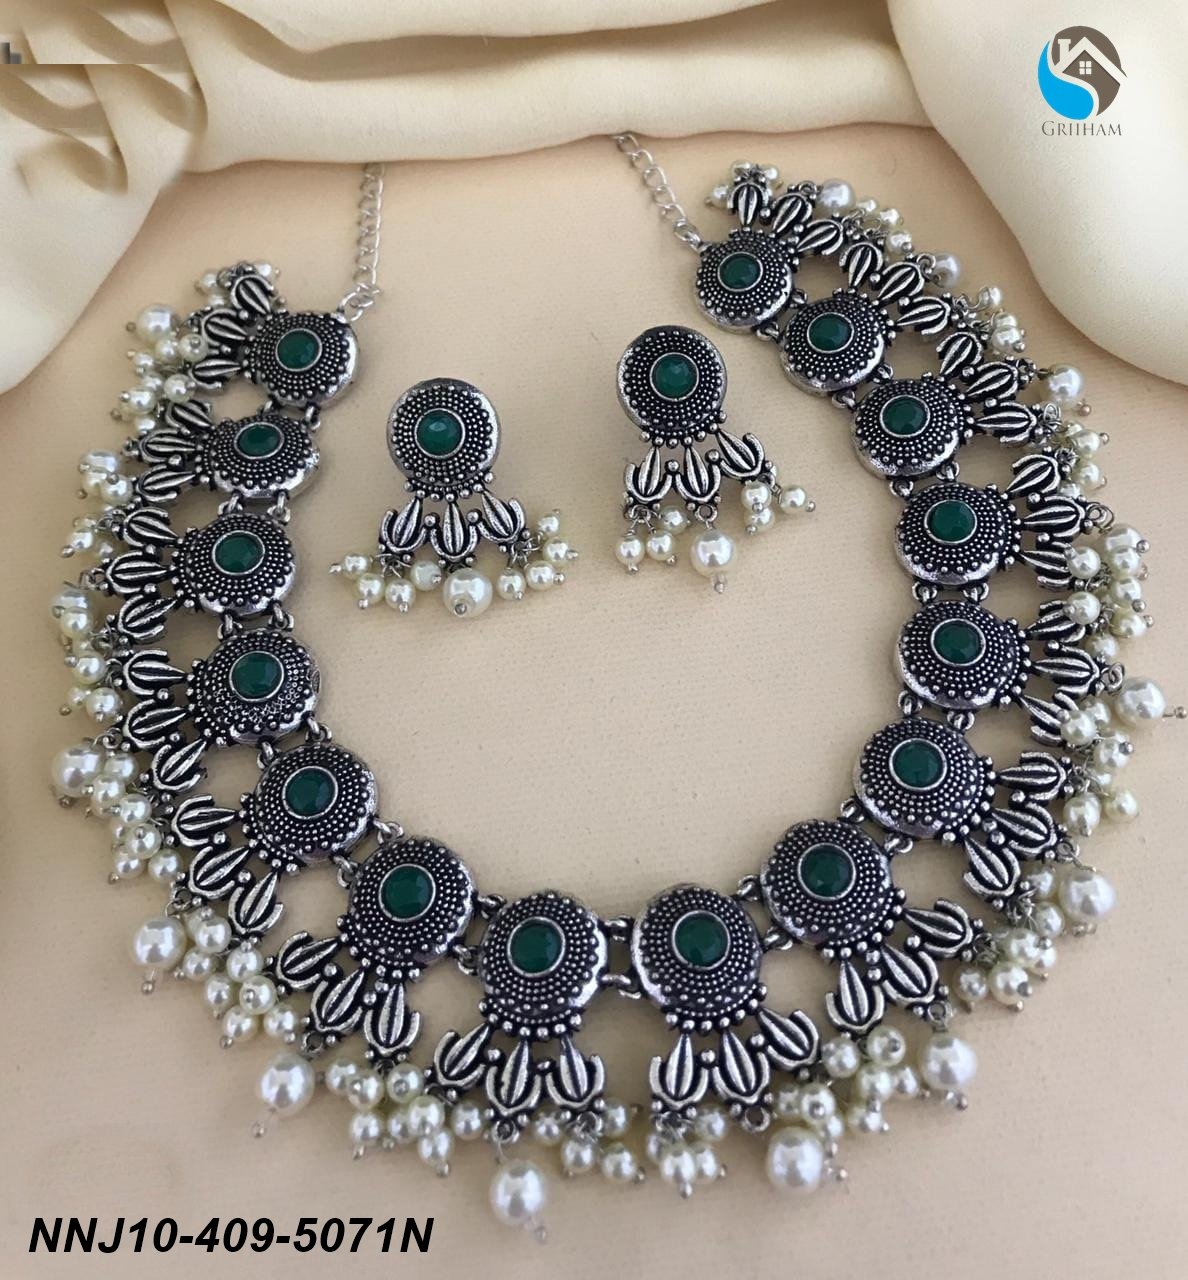 Silver Oxidised Jewelry with Green Stones 5071N